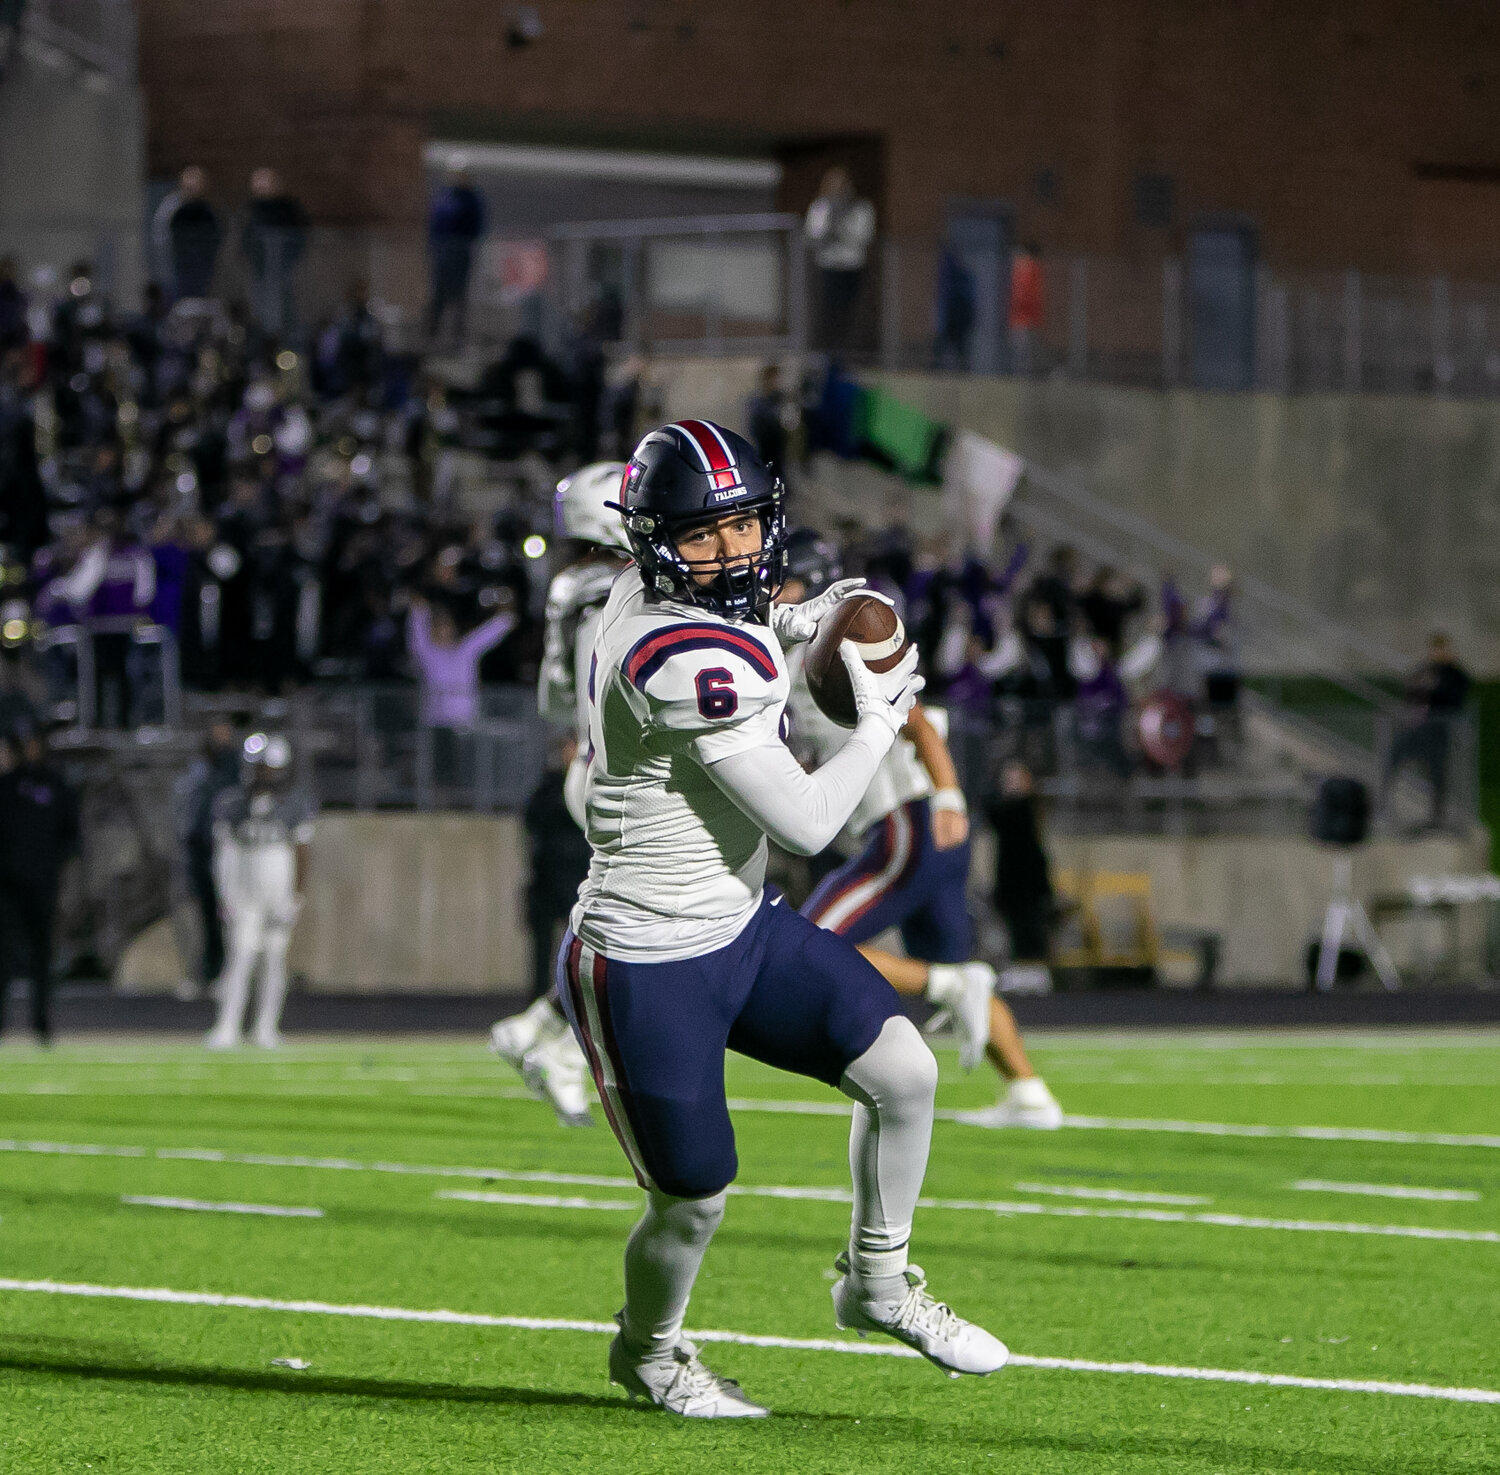 Dylan Rodriguez makes a catch during Friday's game between Tompkins and Ridge Point at Hall Stadium.